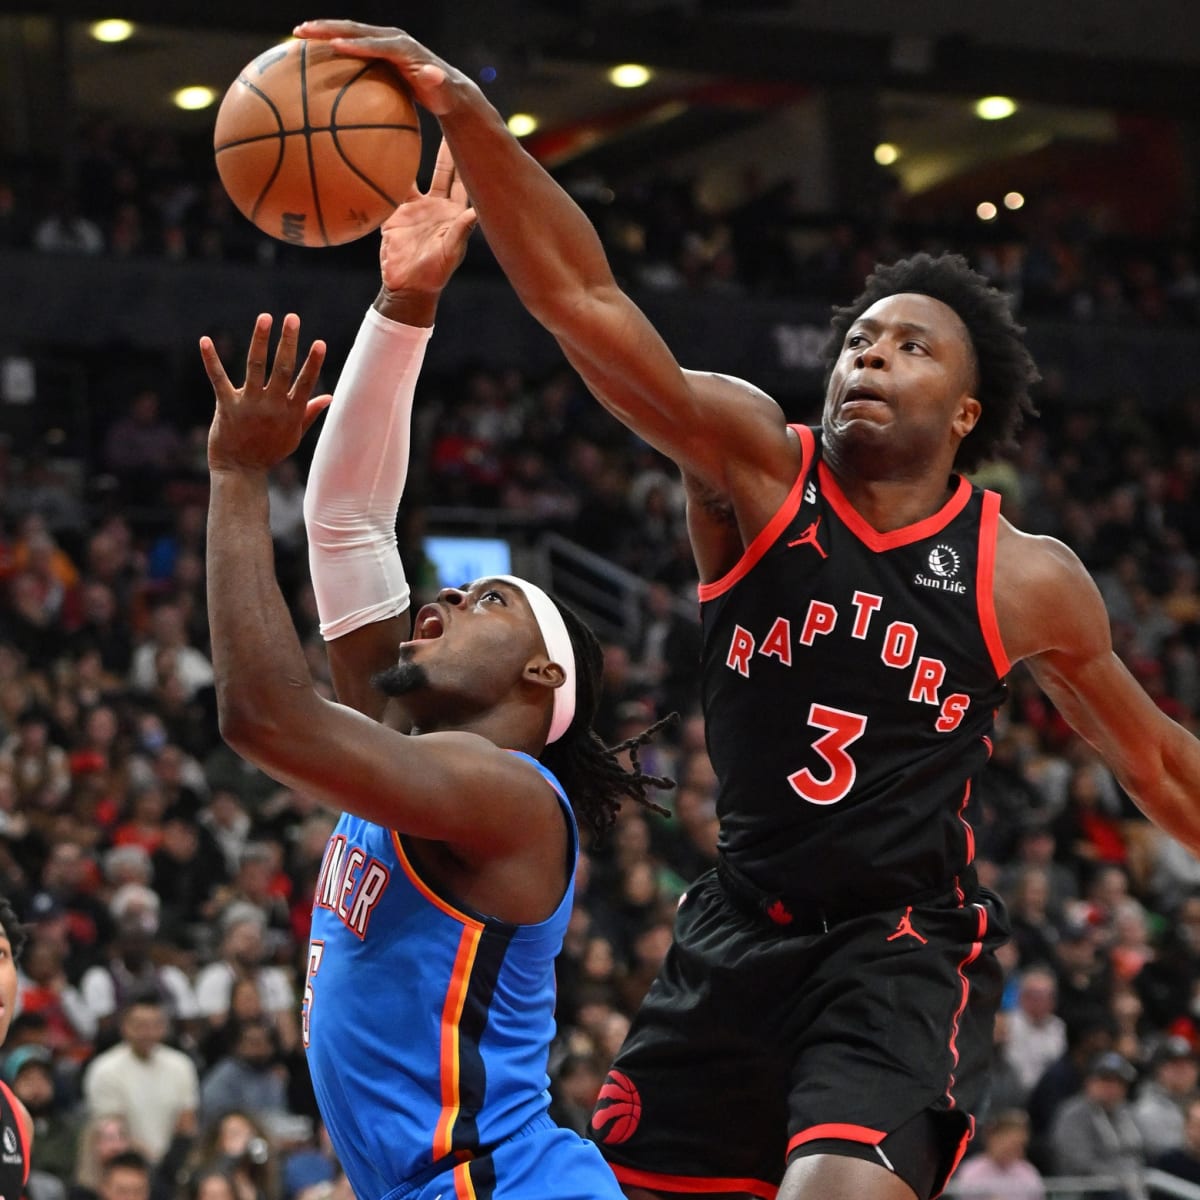 The Knicks complete the transfer of O.G. Anunoby